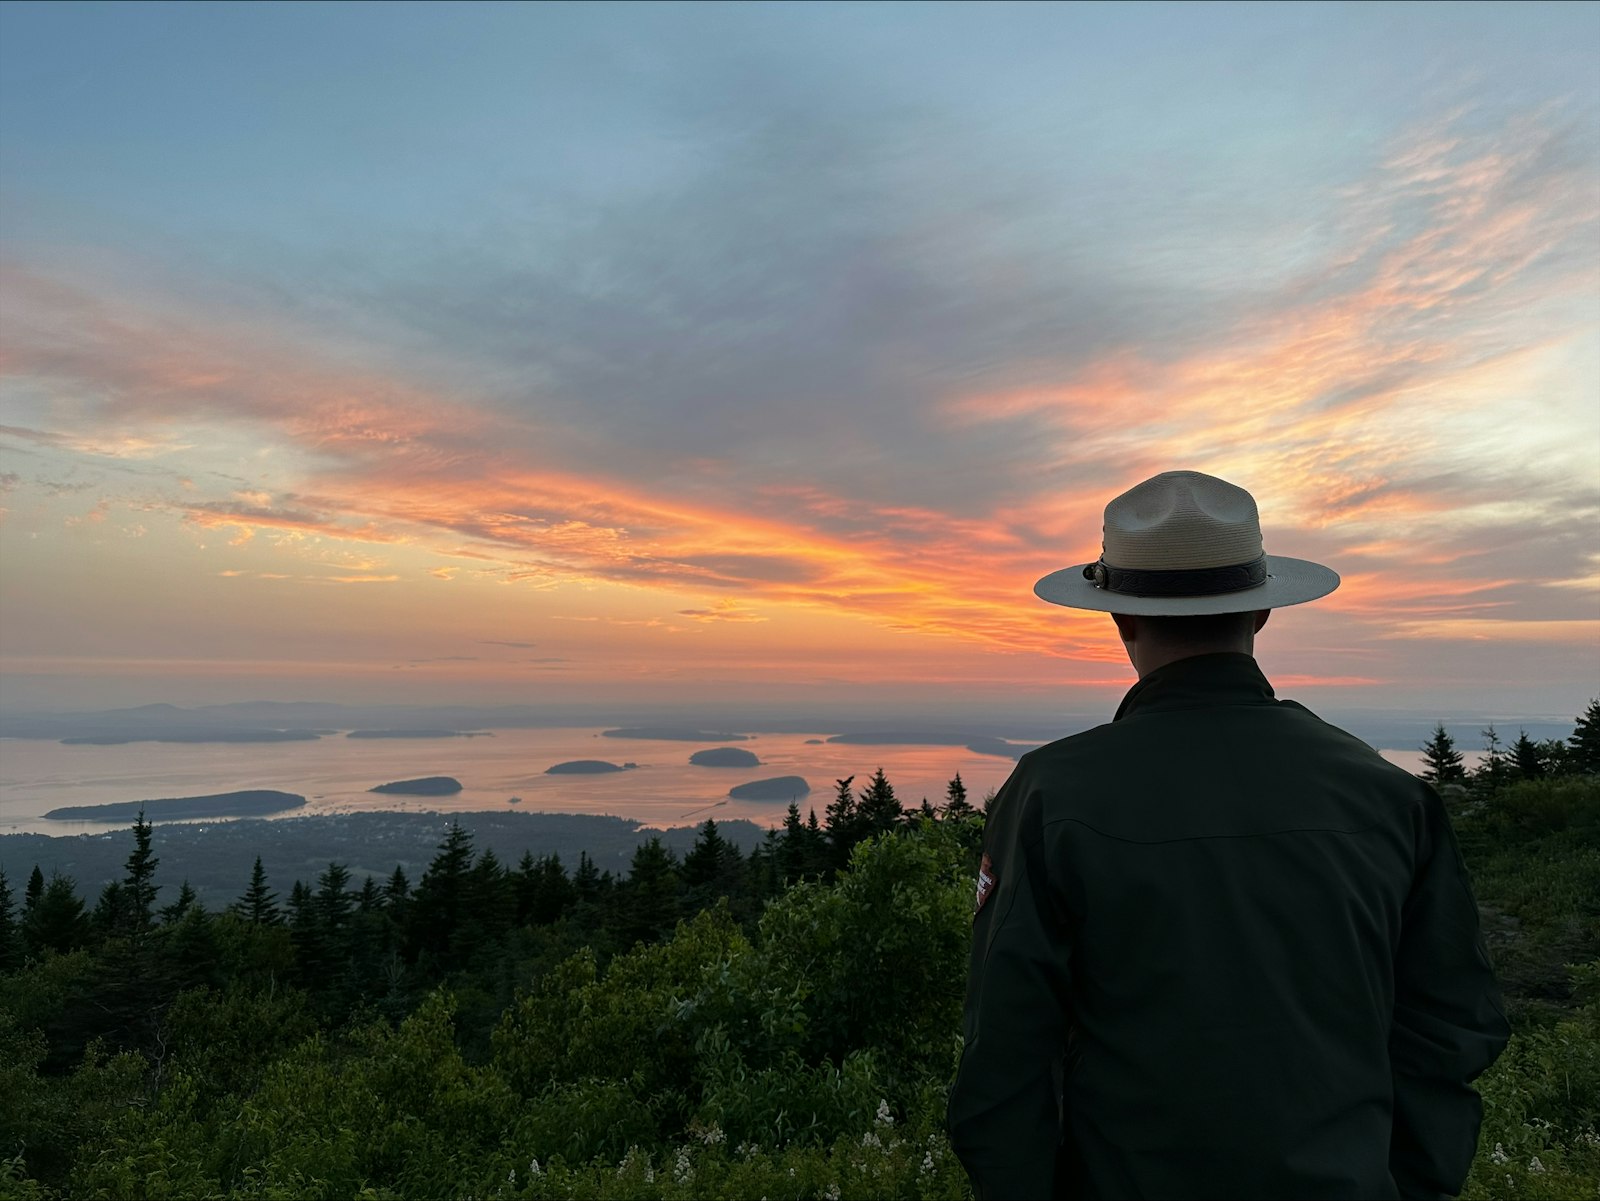 Park ranger at the top of Cadillac Mountain watches sunrise over Frenchman Bay.